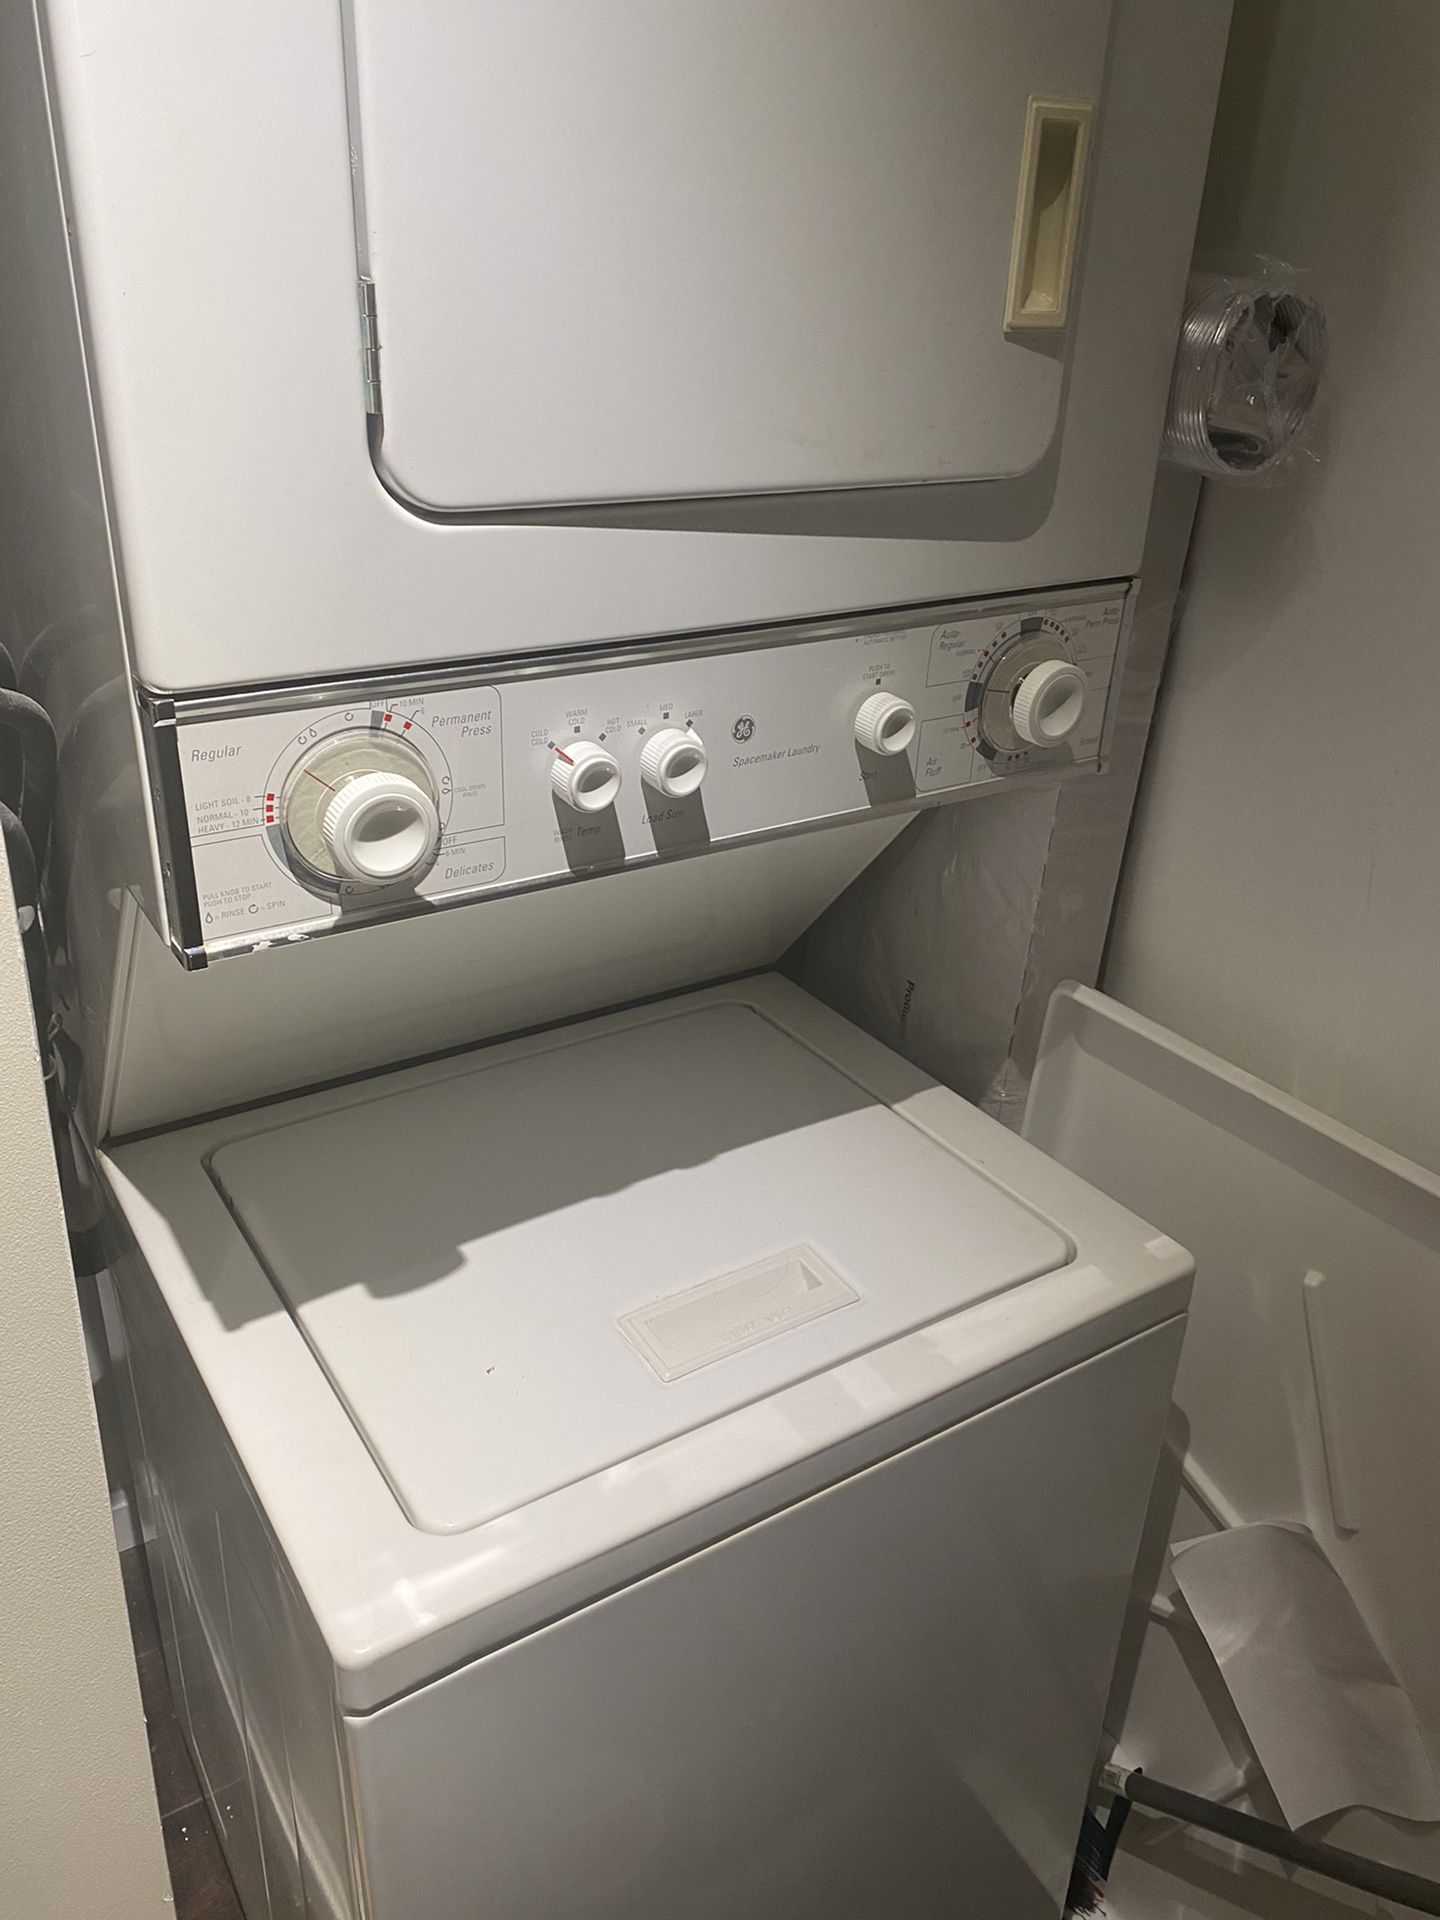 GE Washer and dryer - Gas